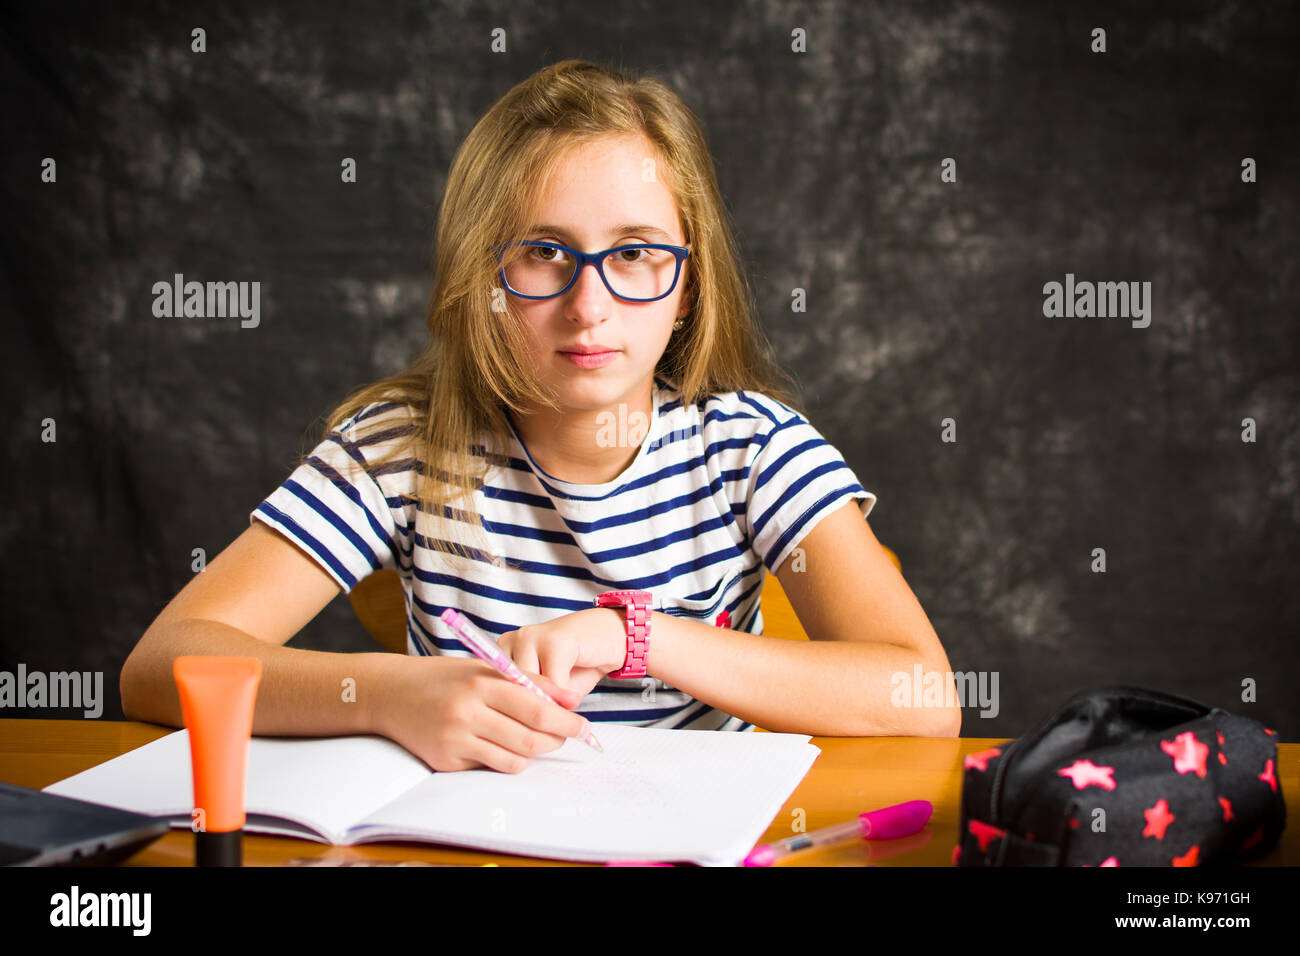 Bored teenage girl doing homework assignment at home Stock Photo